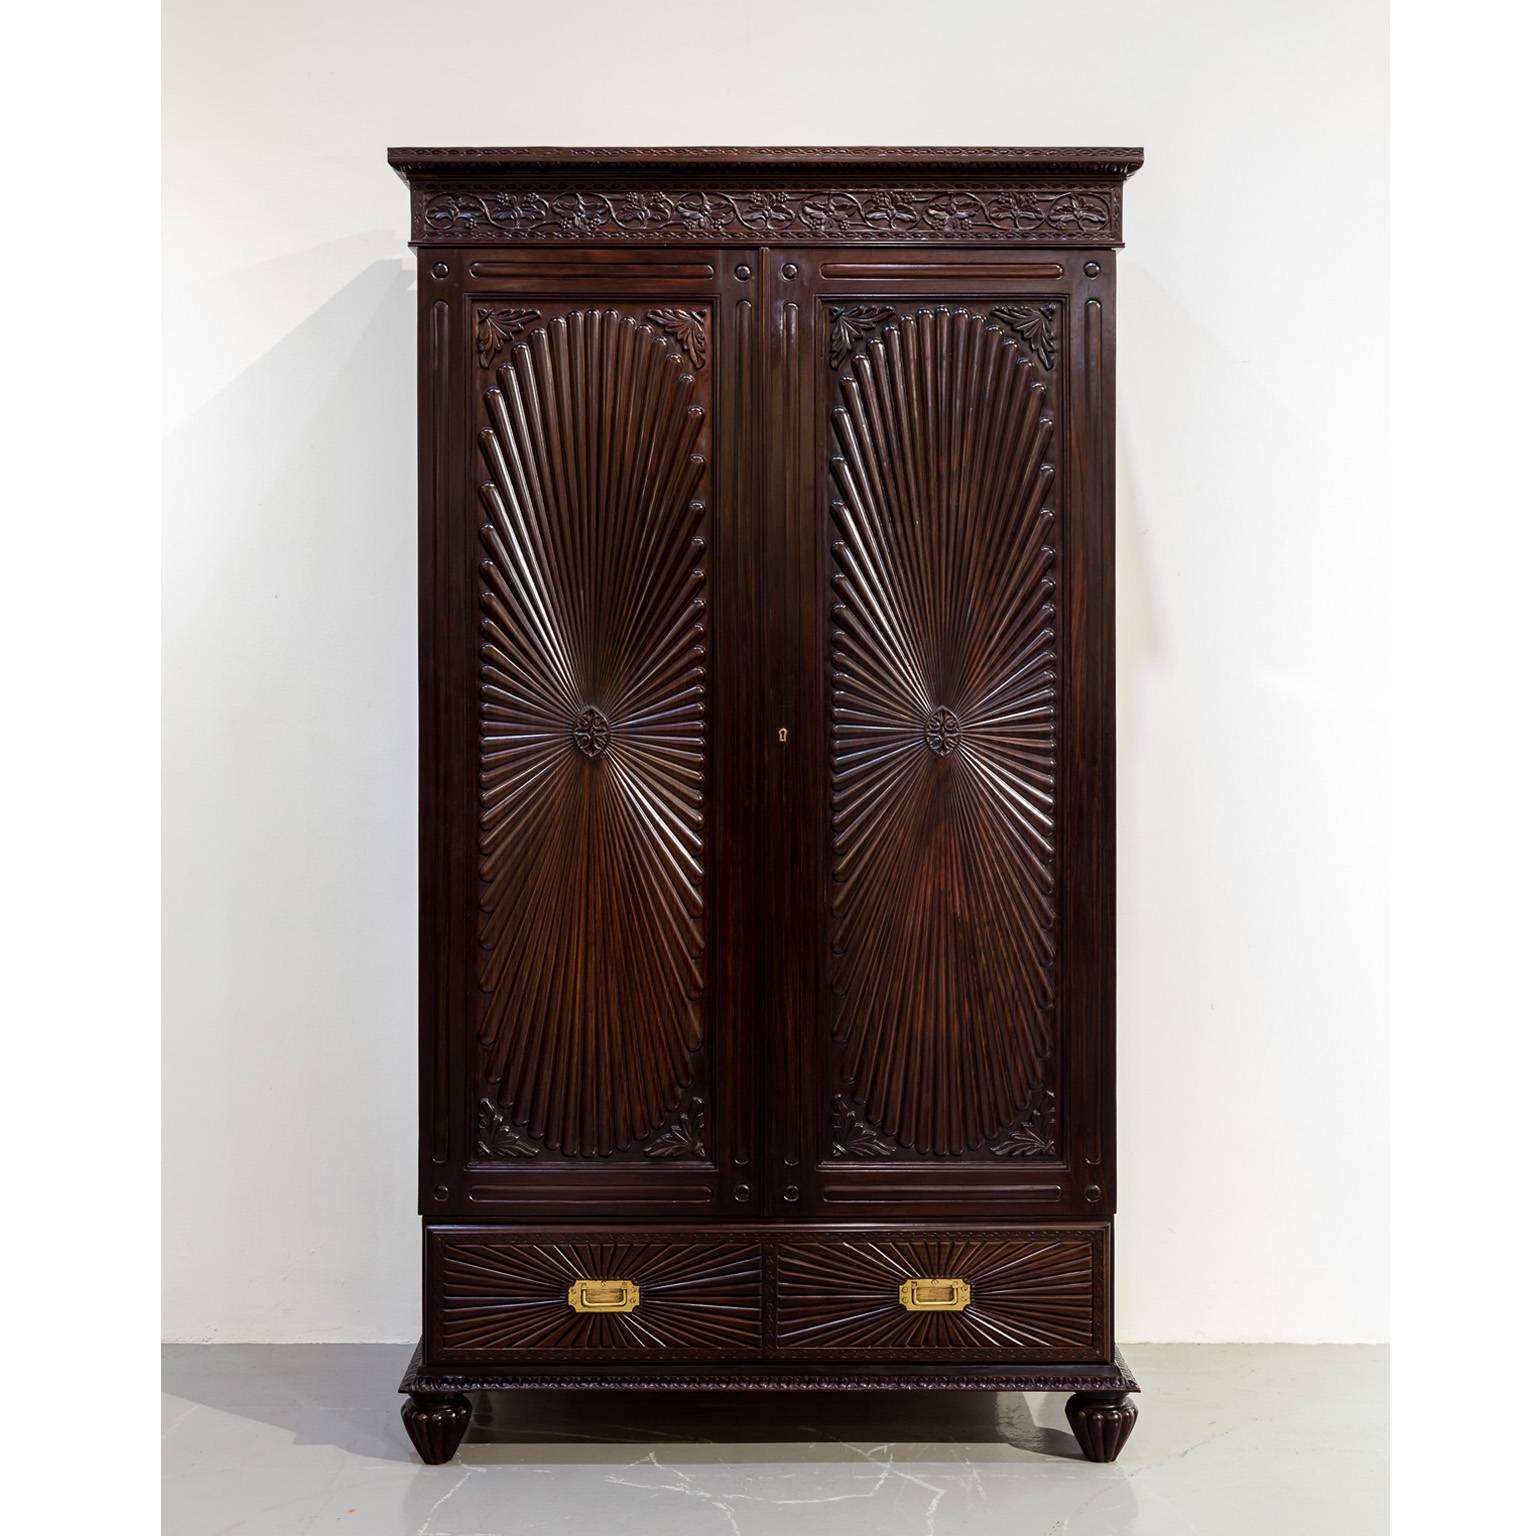 A British Colonial rosewood cupboard with gadrooning on the edge of the flat top and intertwined floral carving on the frieze.
The floating panels of the doors are carved with a large oval sunburst design, centred with an oval disk and leaf